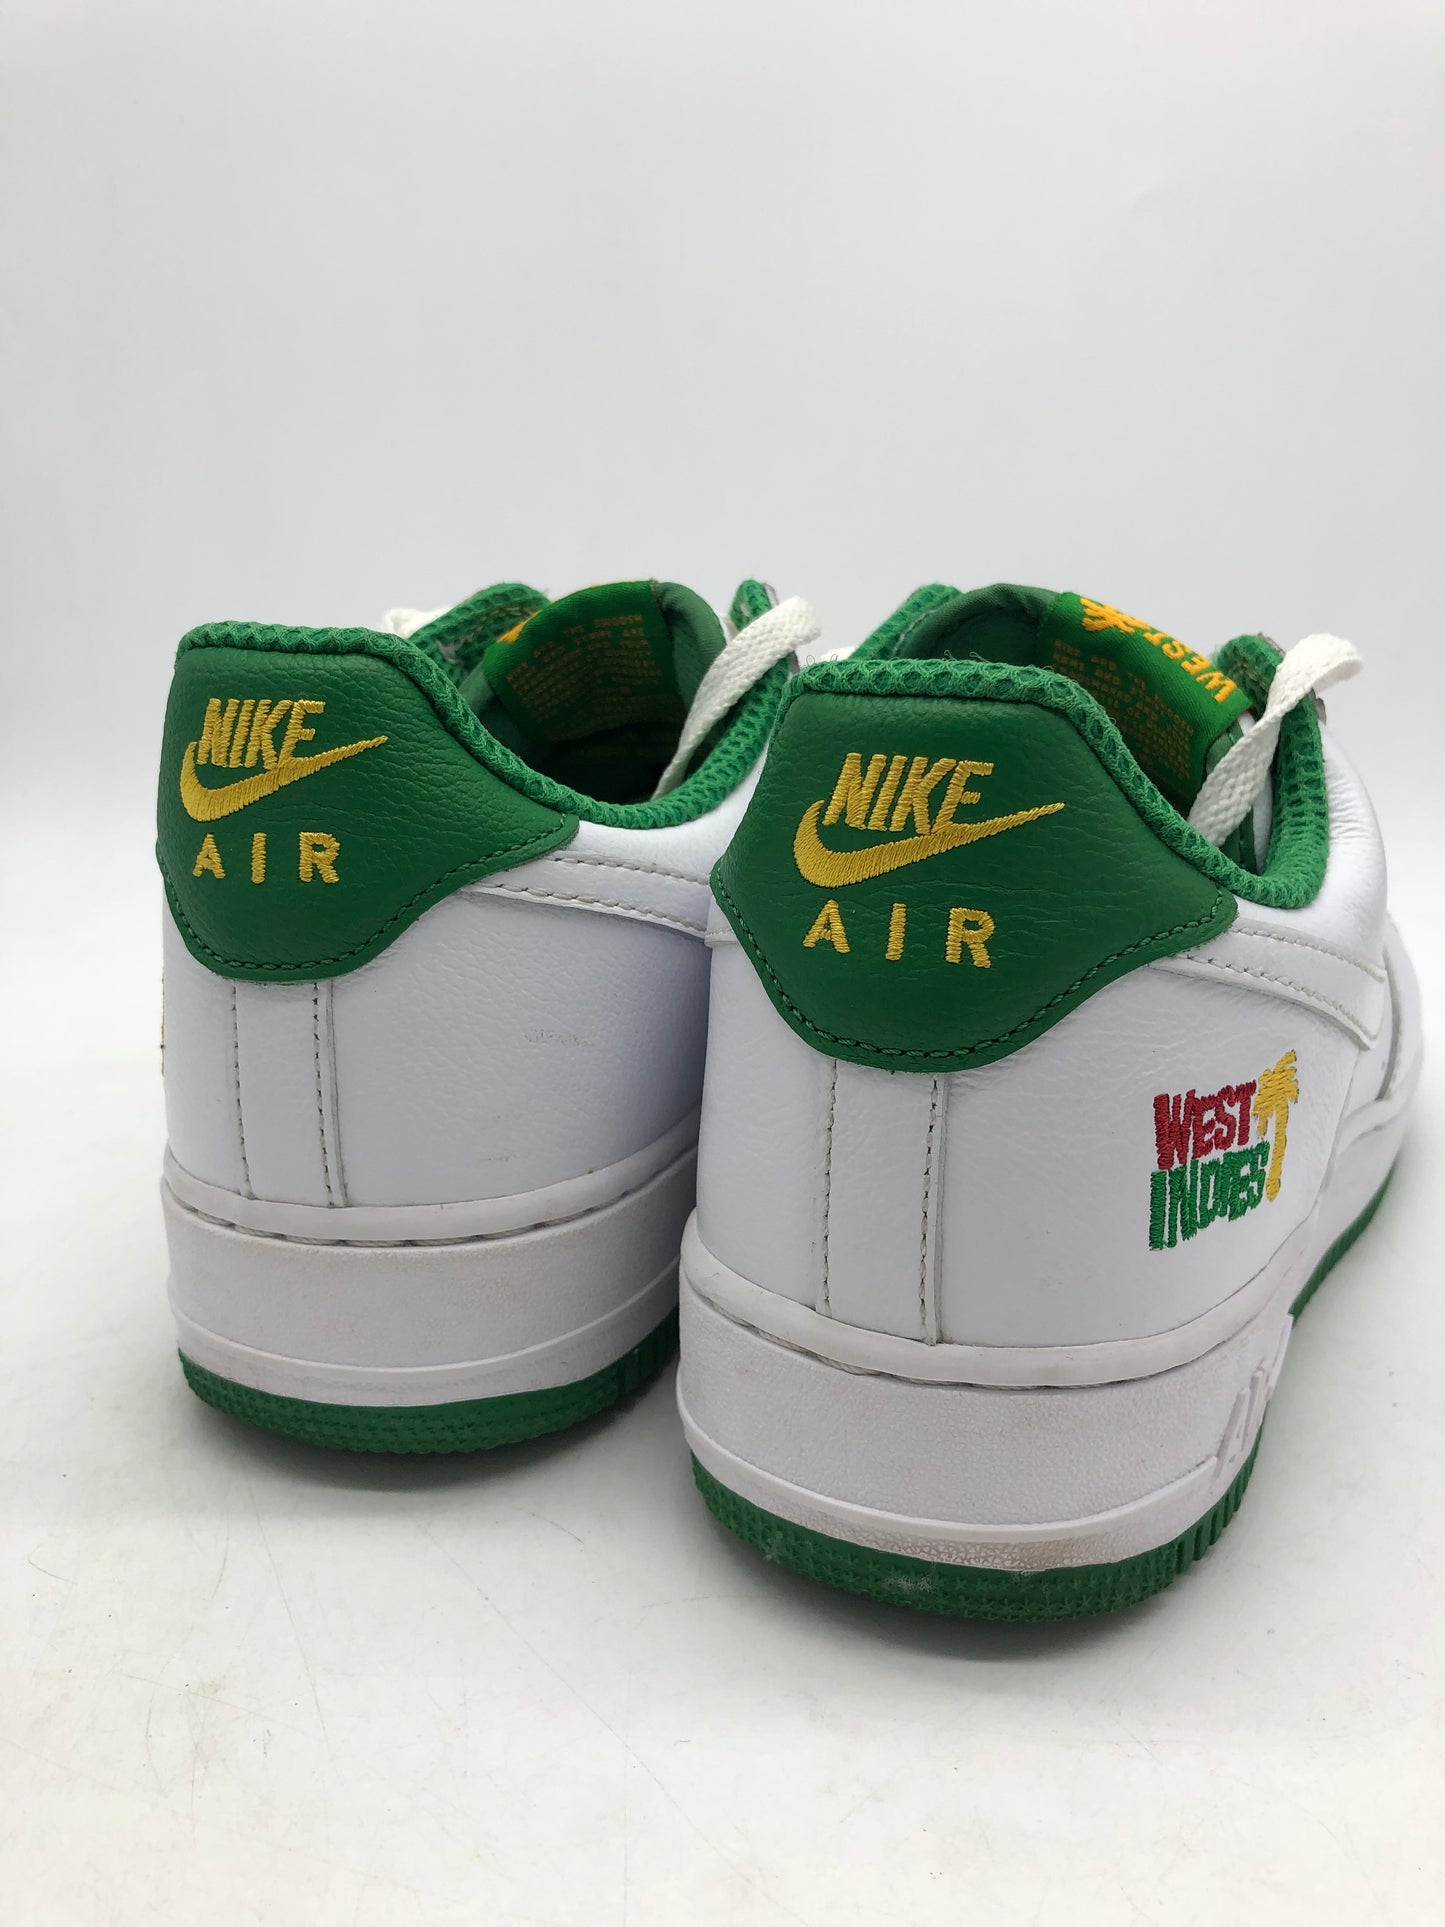 Preowned Nike Air Force 1 Low Retro QS West Indies Sz 10.5M/12W